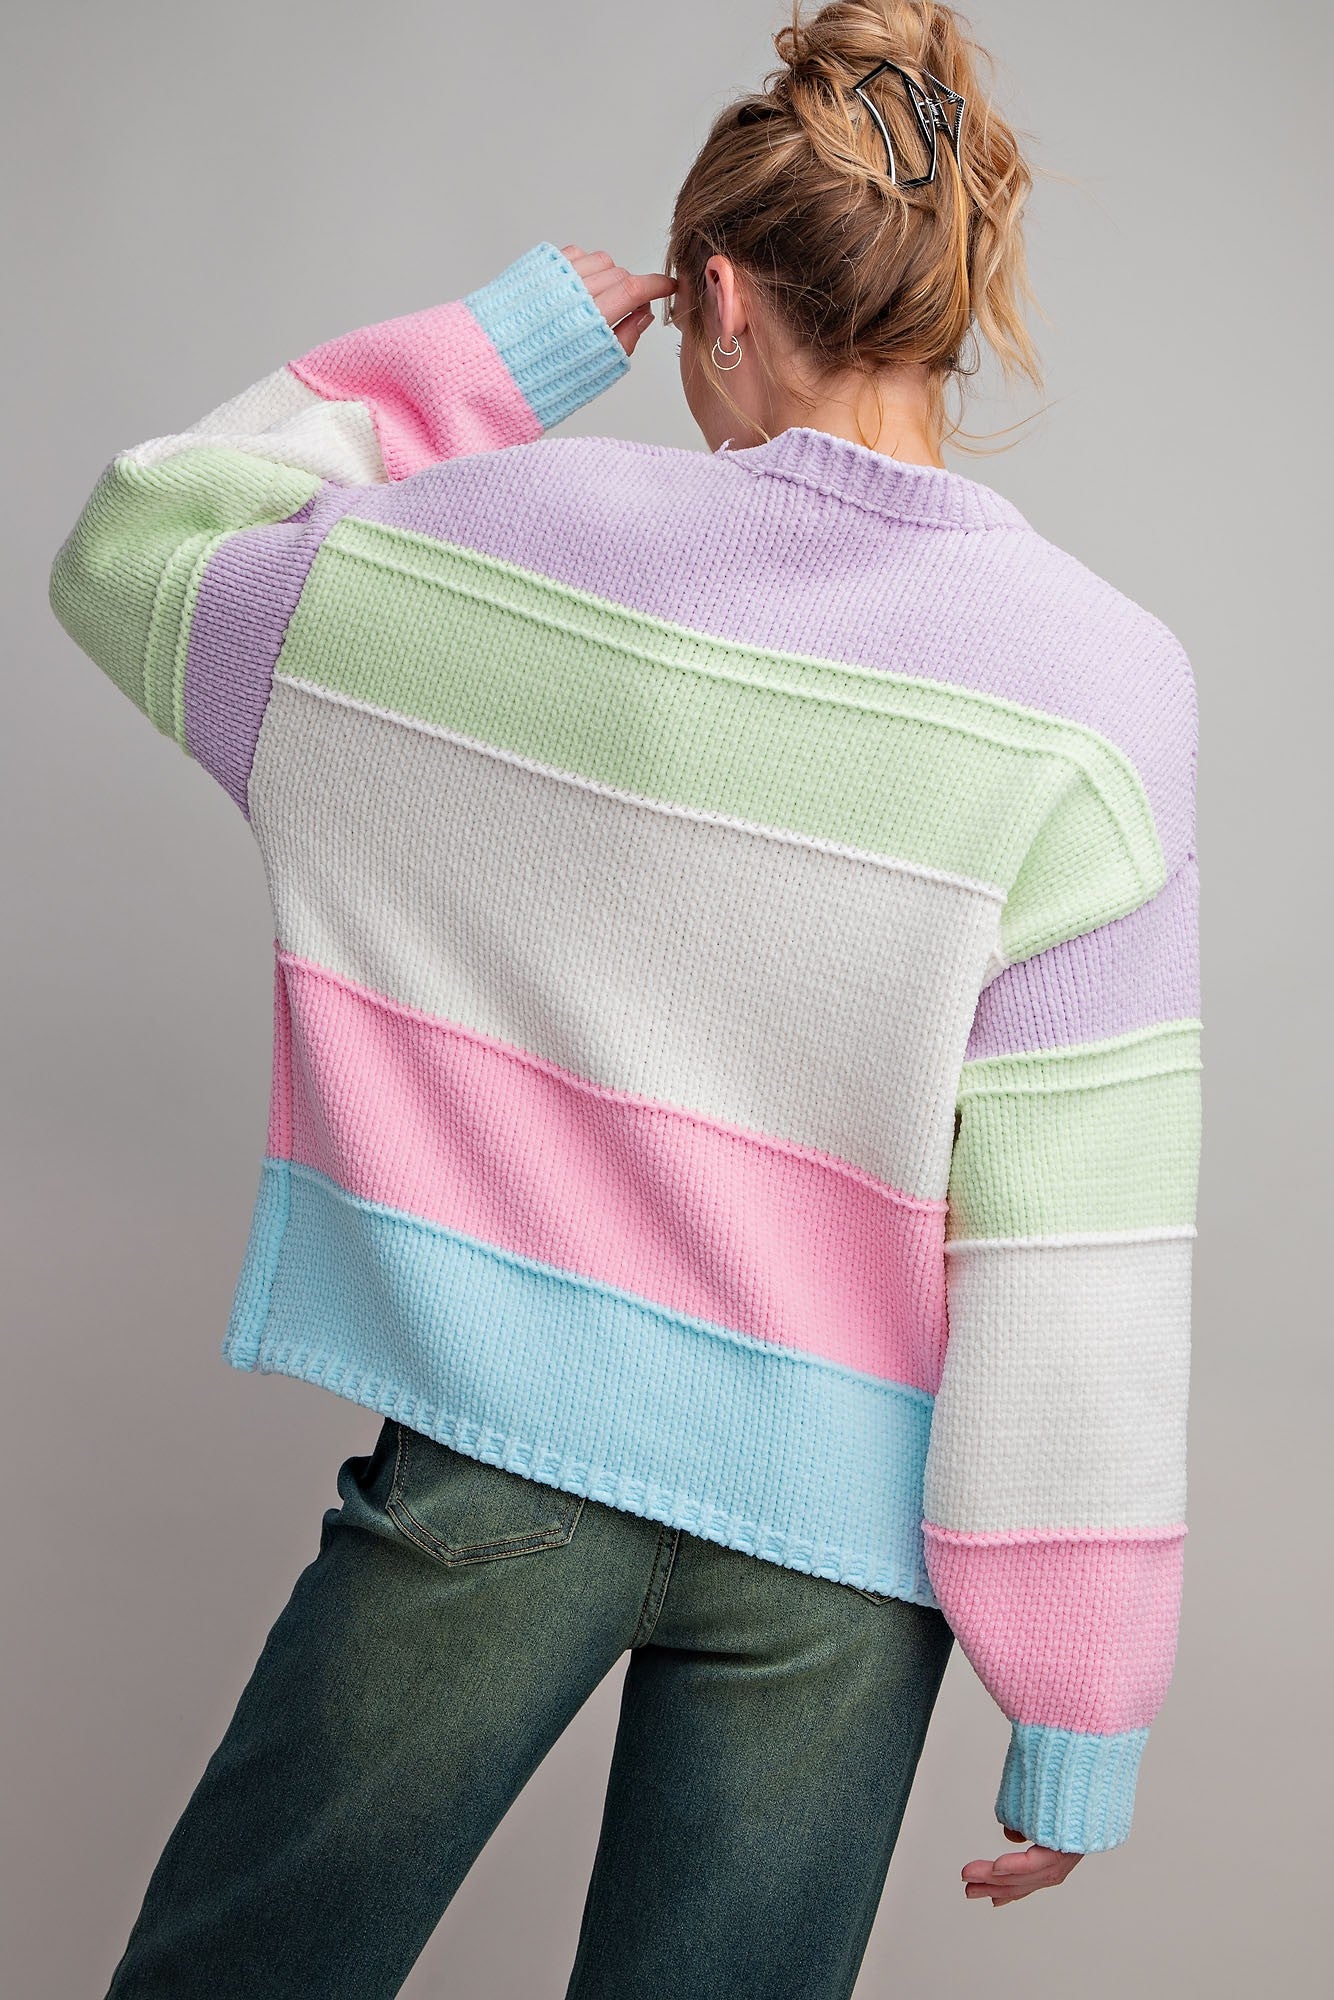 Mint Green and Pink Striped Beige Knit Sweater